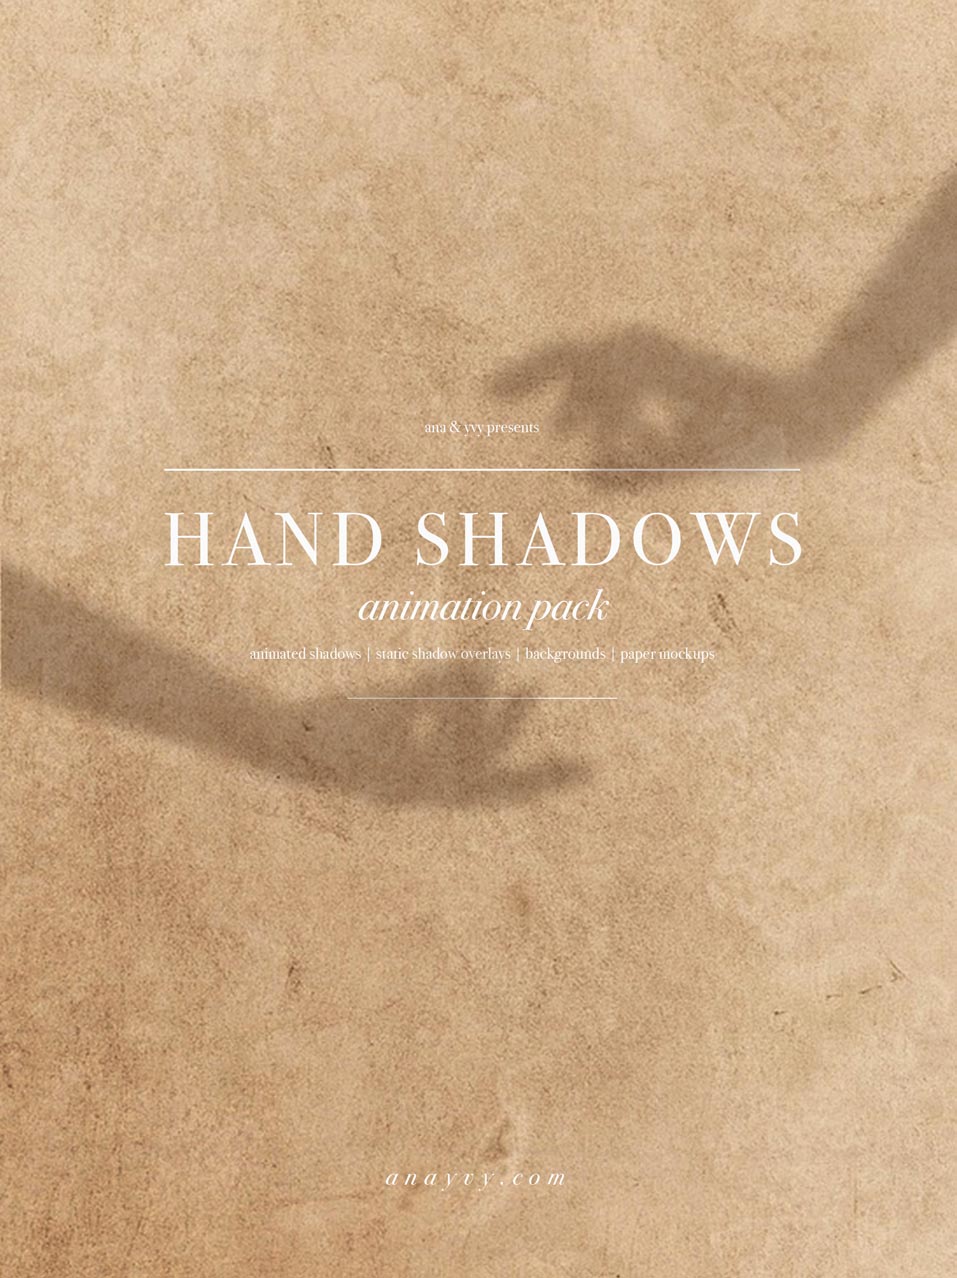 Animated Shadows | Touch of Hand - ANA & YVY